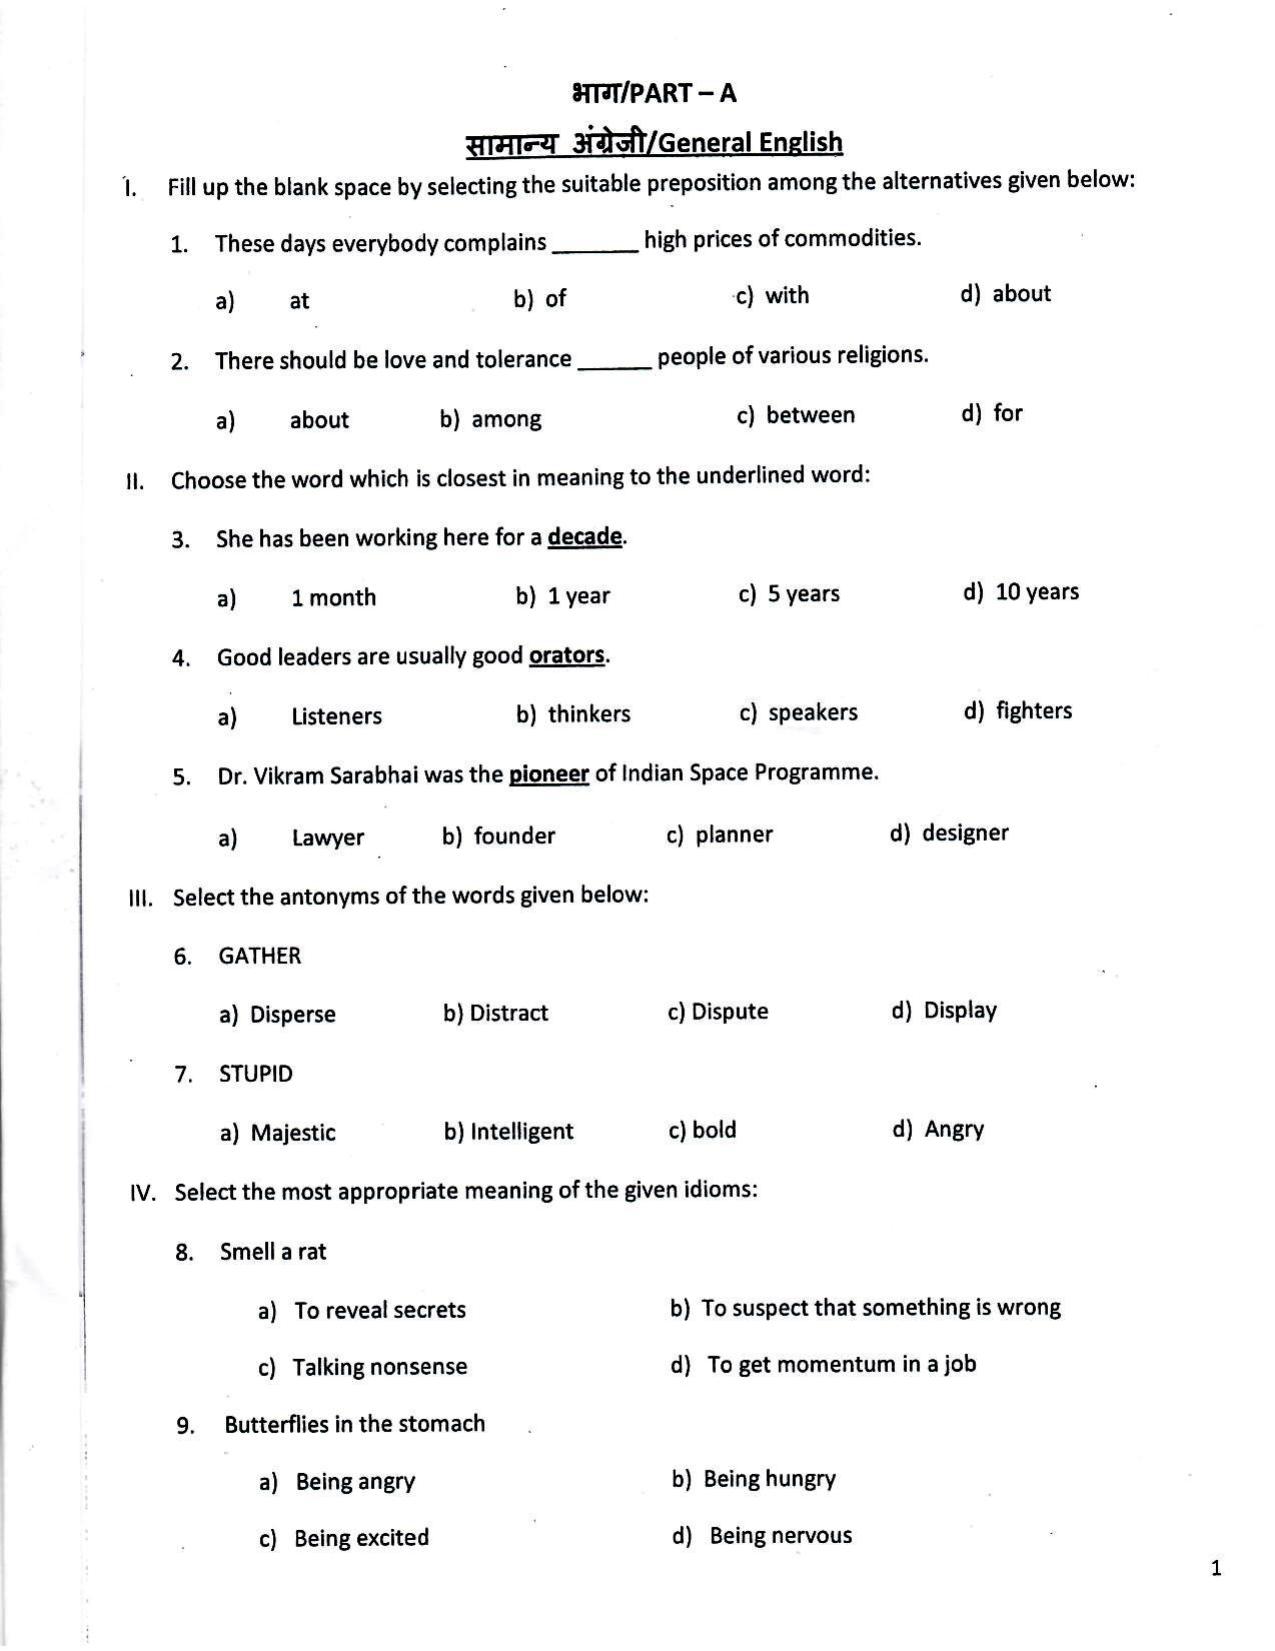 LPSC Hindi Typist 2020 Question Paper - Page 2